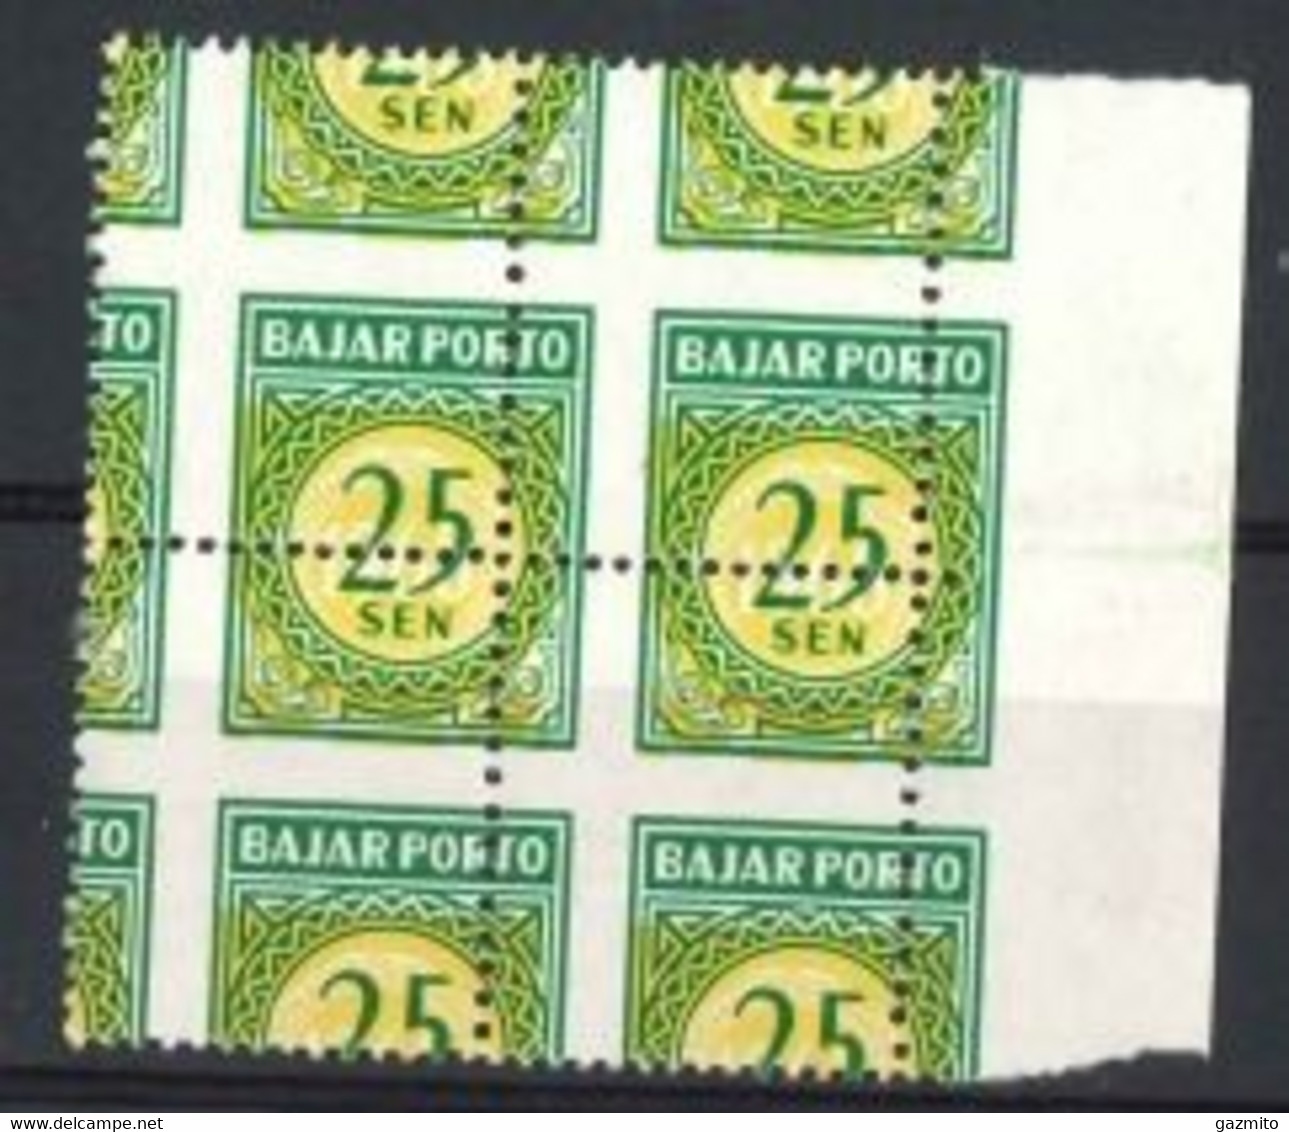 Indonesia 1966, TAXE, Numeral, CUTTING ERROR - Oddities On Stamps